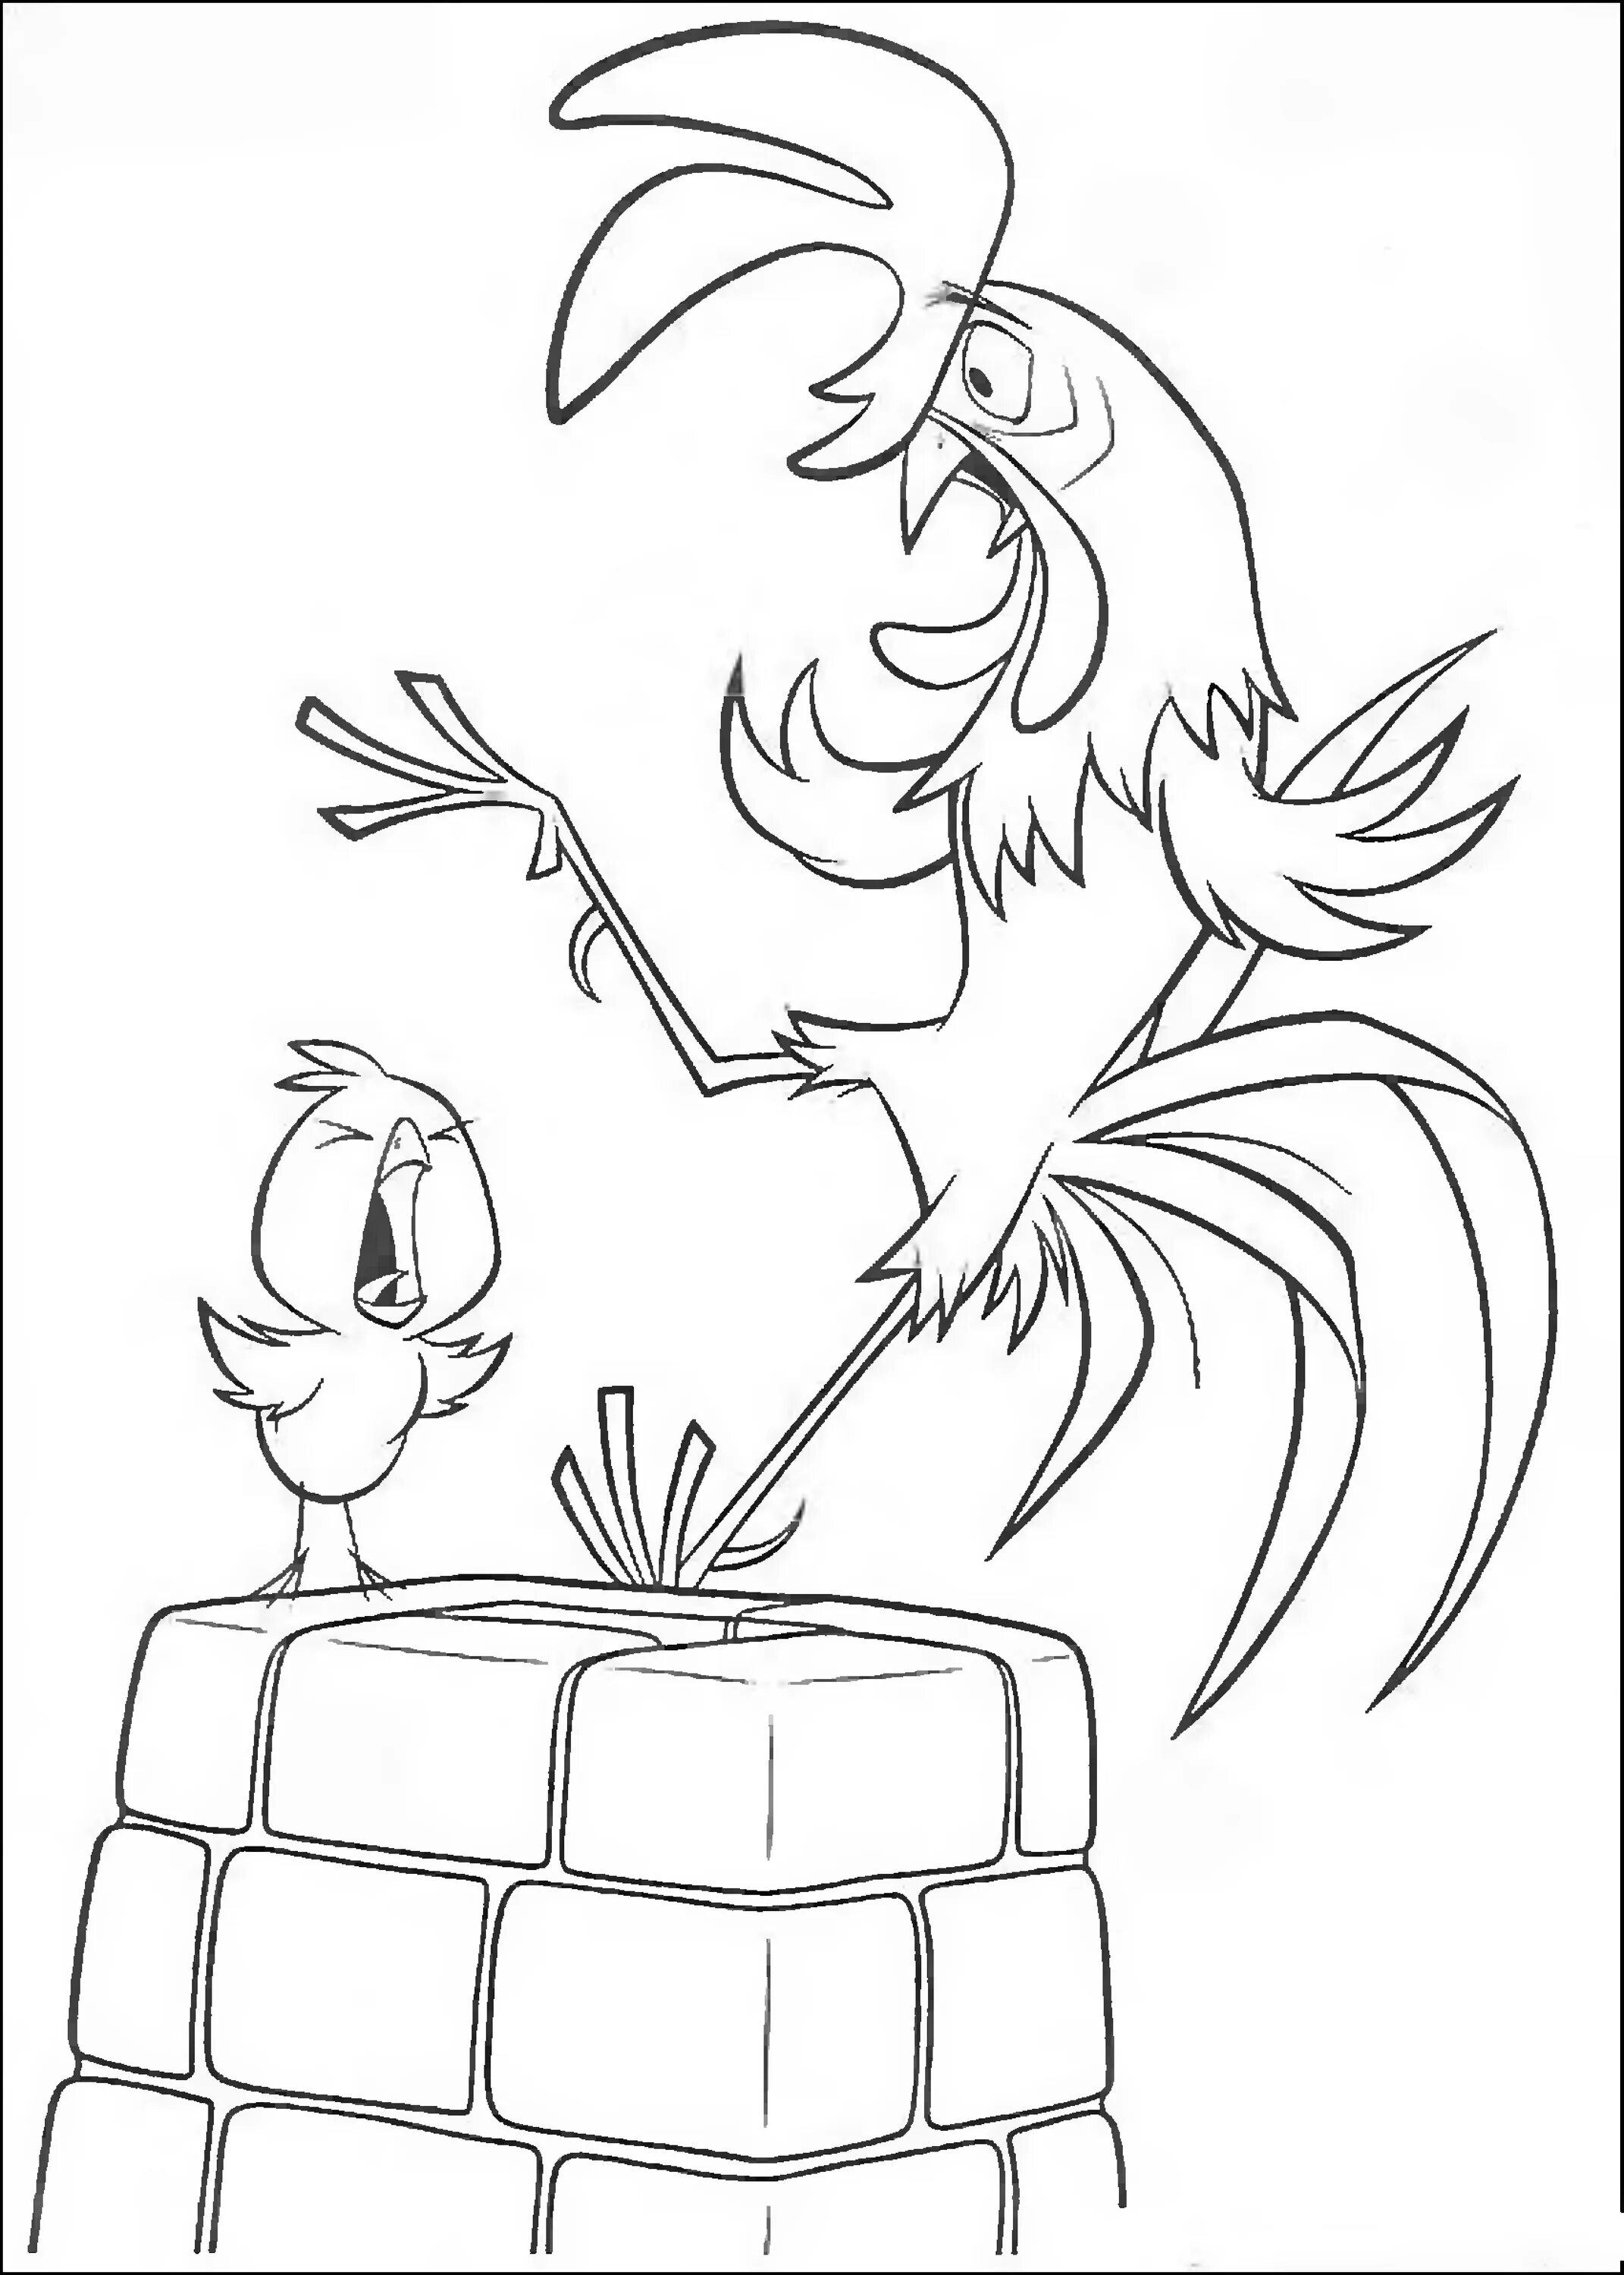 Joyful rooster coloring page